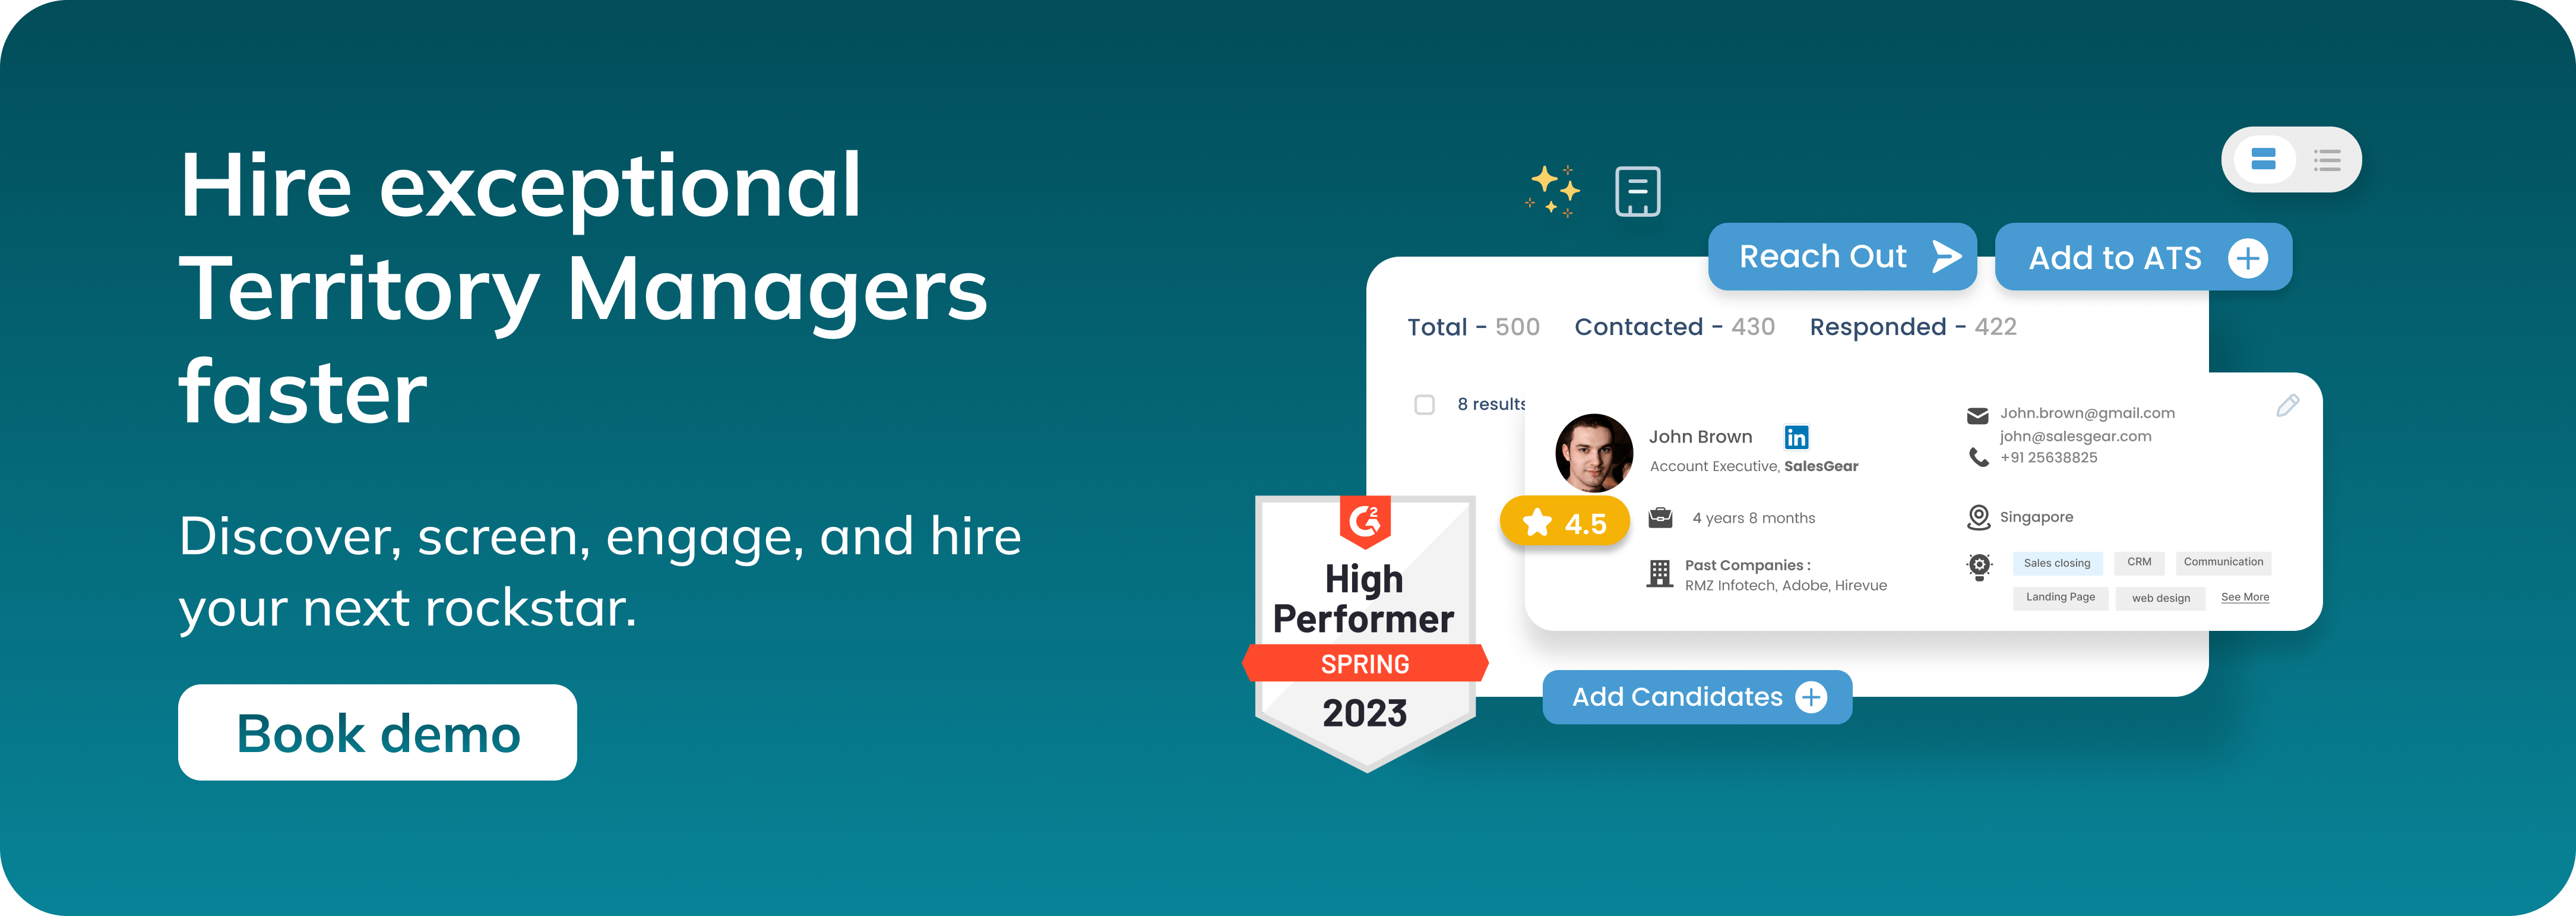 How to hire the perfect Territory Manager.png